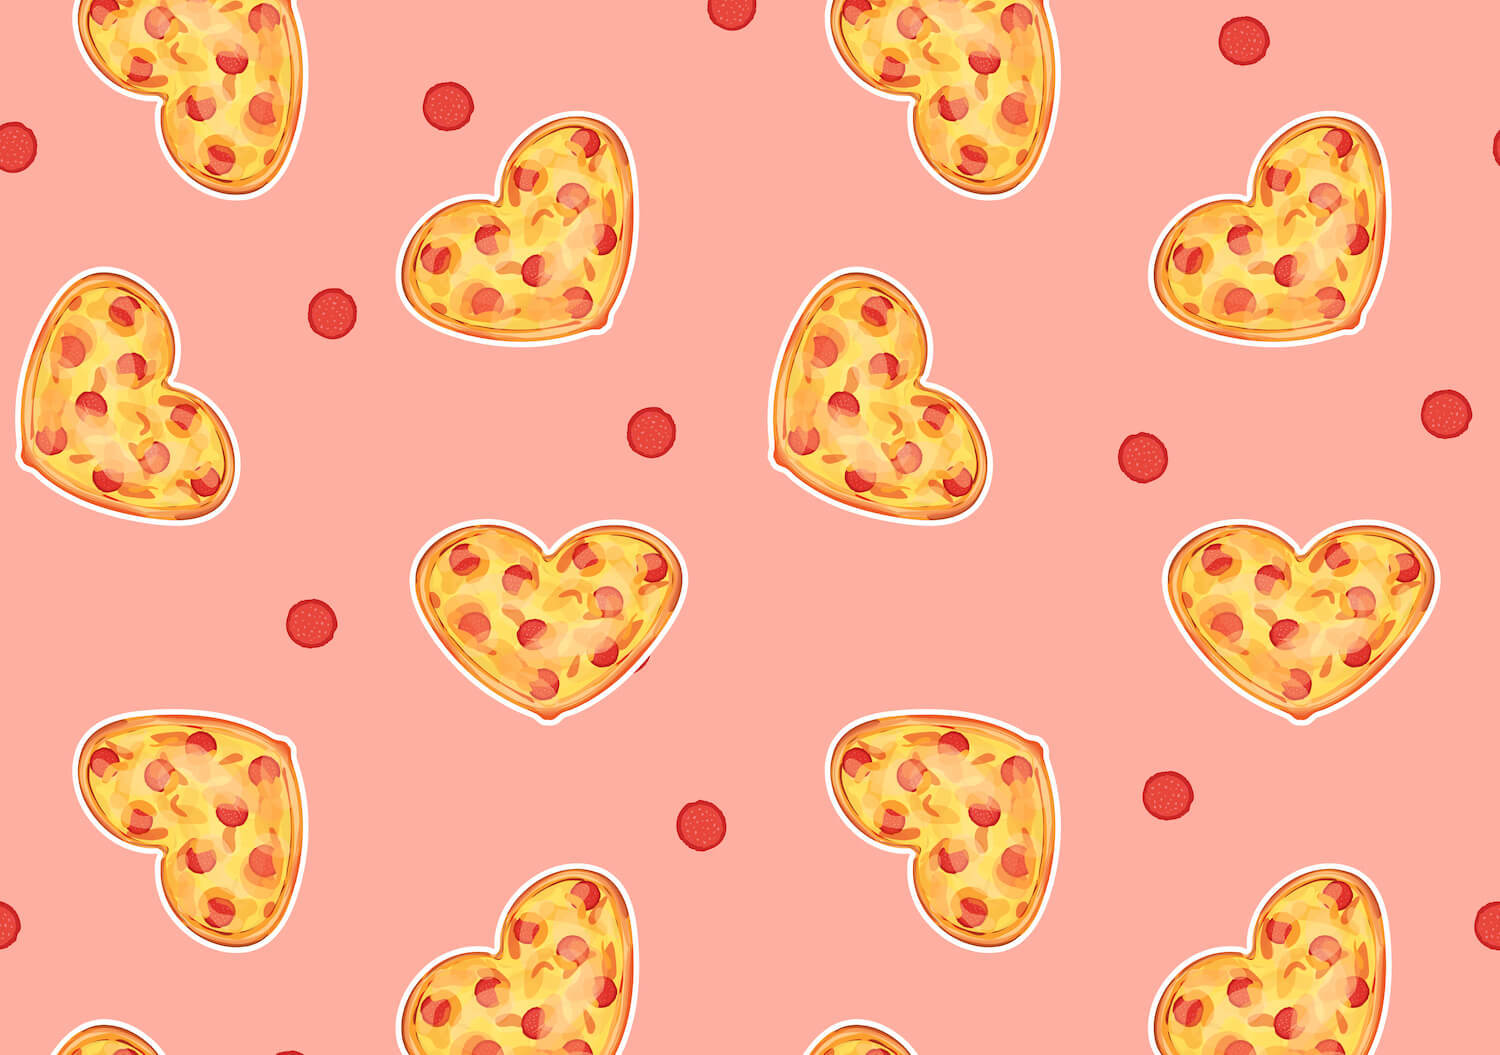 Illustrations of heart-shaped pizza on a pink background. February 2021